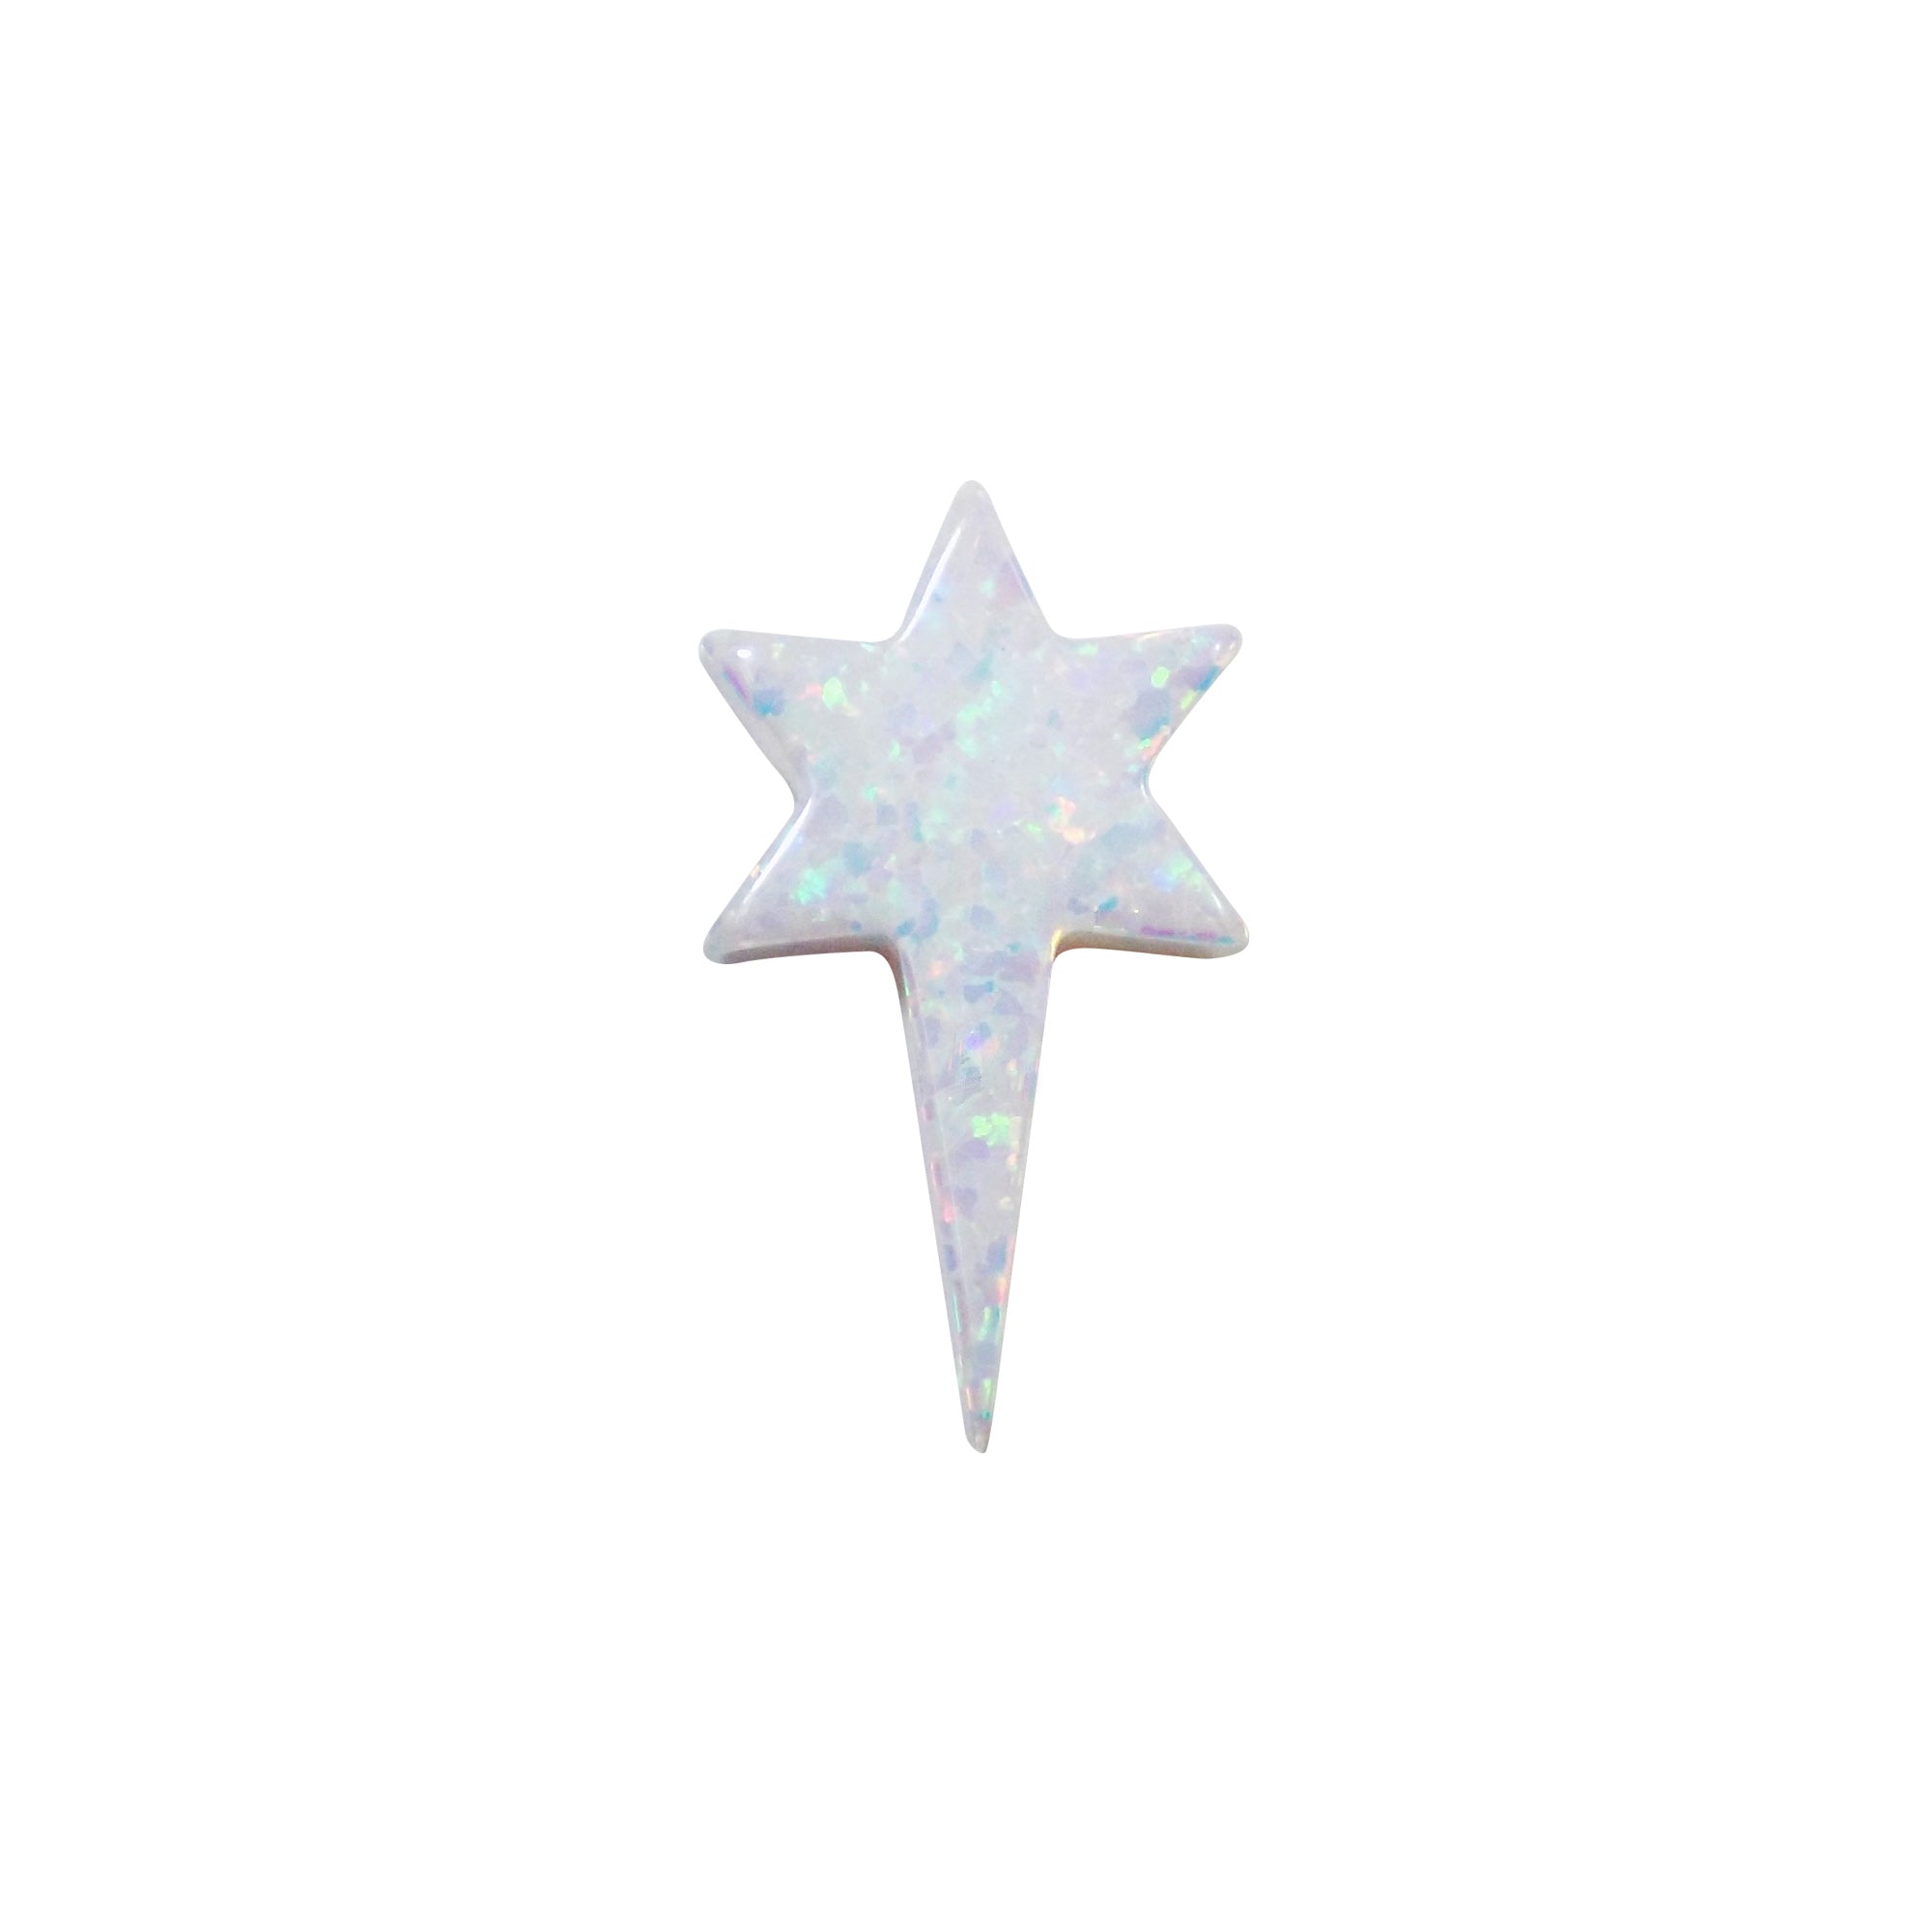 Opal North Star Charm, Shooting Star, Starburst Opal Charm Pendant, NorthStar Opal Bead Side Holes 1mm, GIA Certified Opals USA Seller